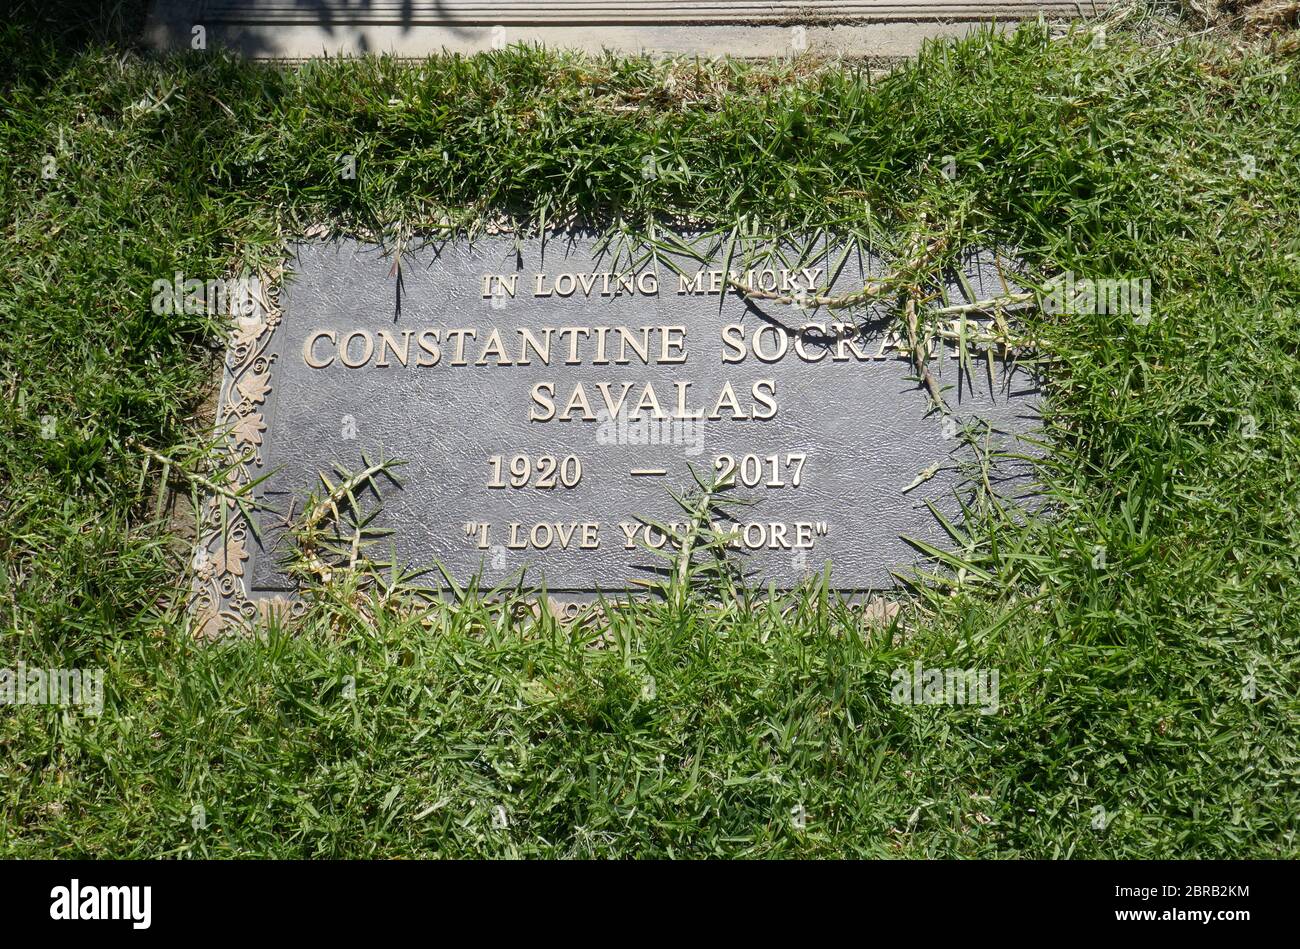 Los Angeles, California, USA 20th May 2020 A general view of atmosphere of Constantine Savalas grave at Forest Lawn Memorial Park on May 20, 2020 in Los Angeles, California, USA. Photo by Barry King/Alamy Stock Photo Stock Photo